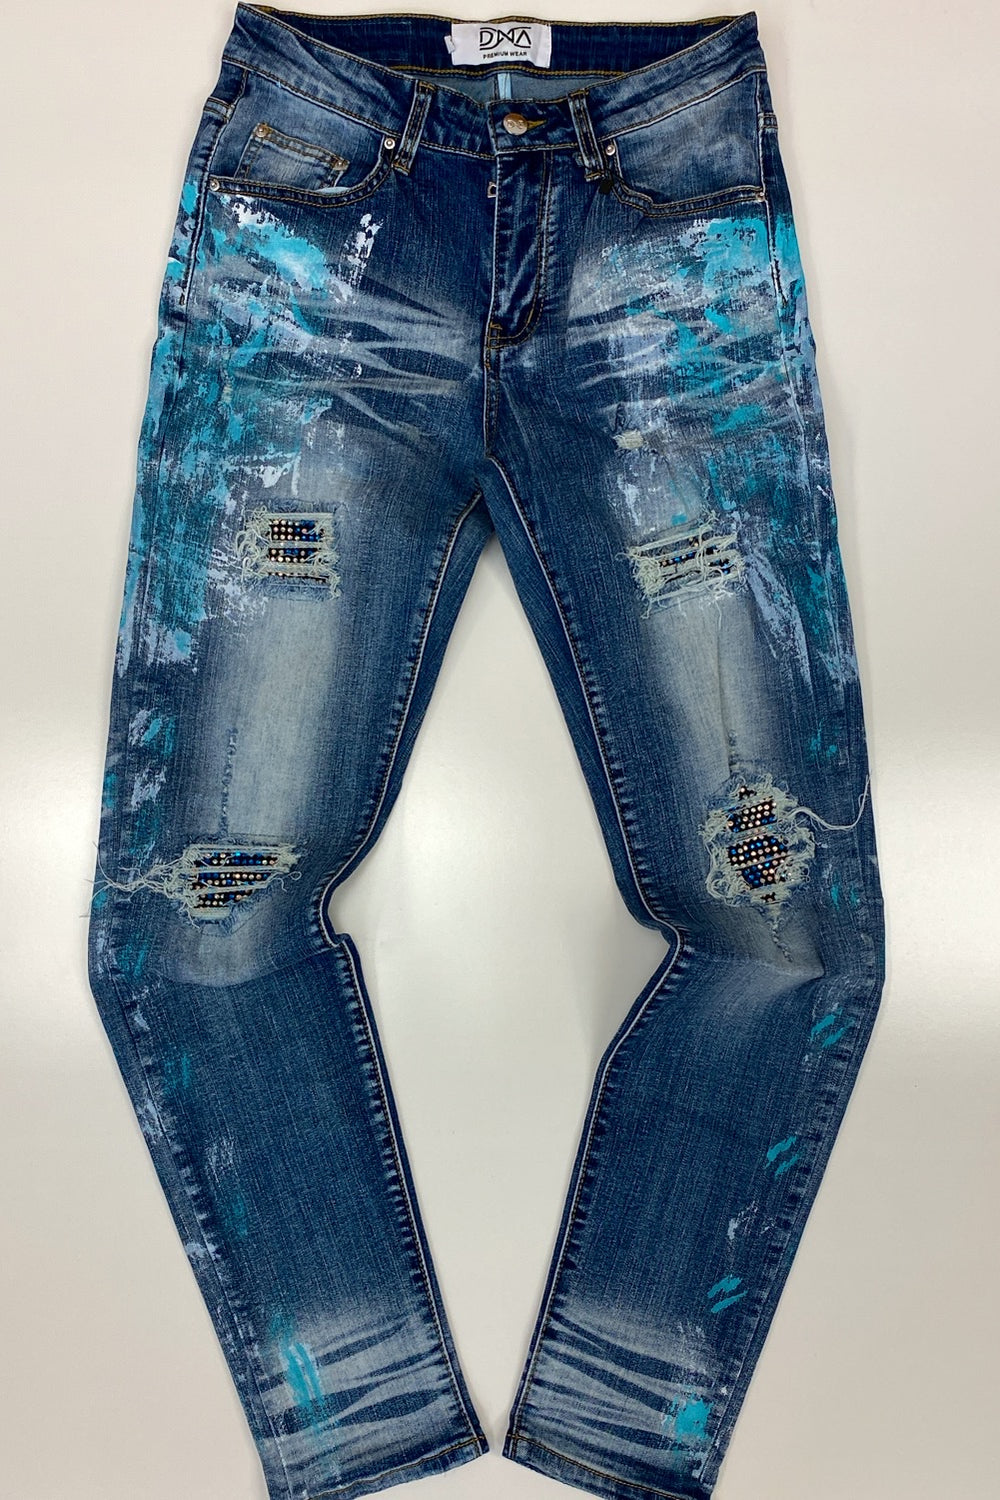 Dna Premium Wear- studded color patch jeans w/ blue and white paint